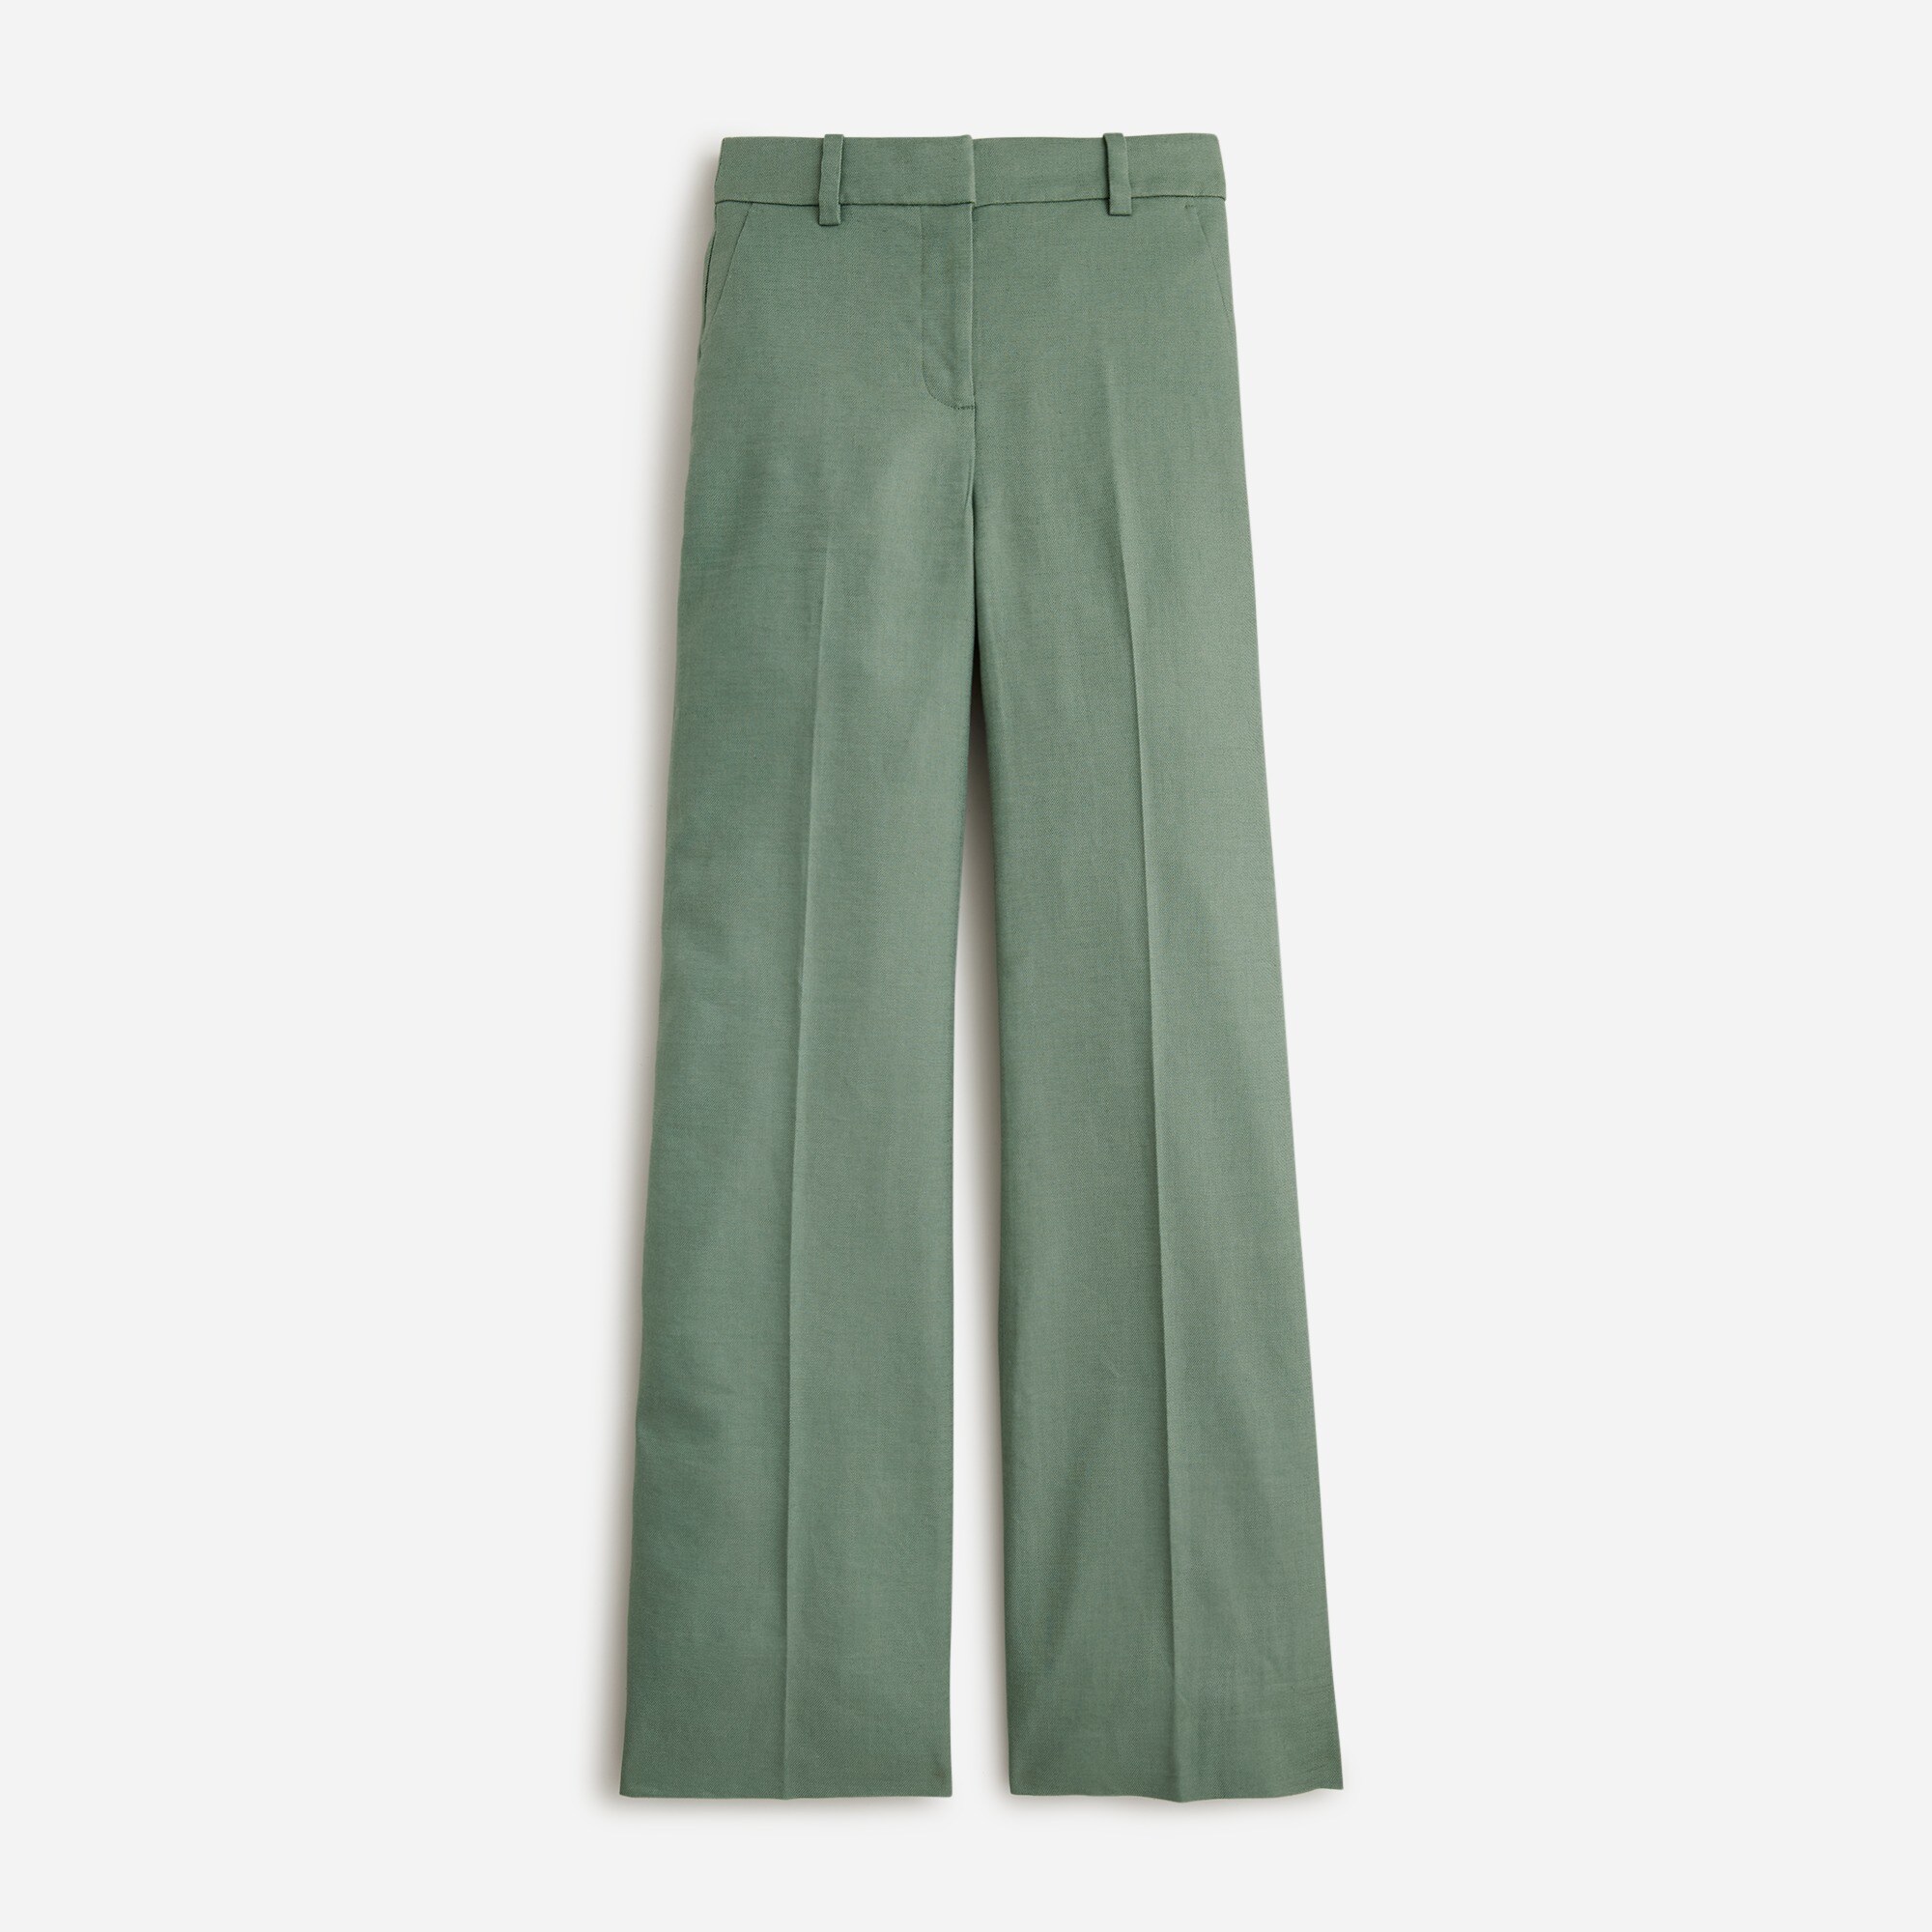  Tall Carolina flare pant in stretch linen blend